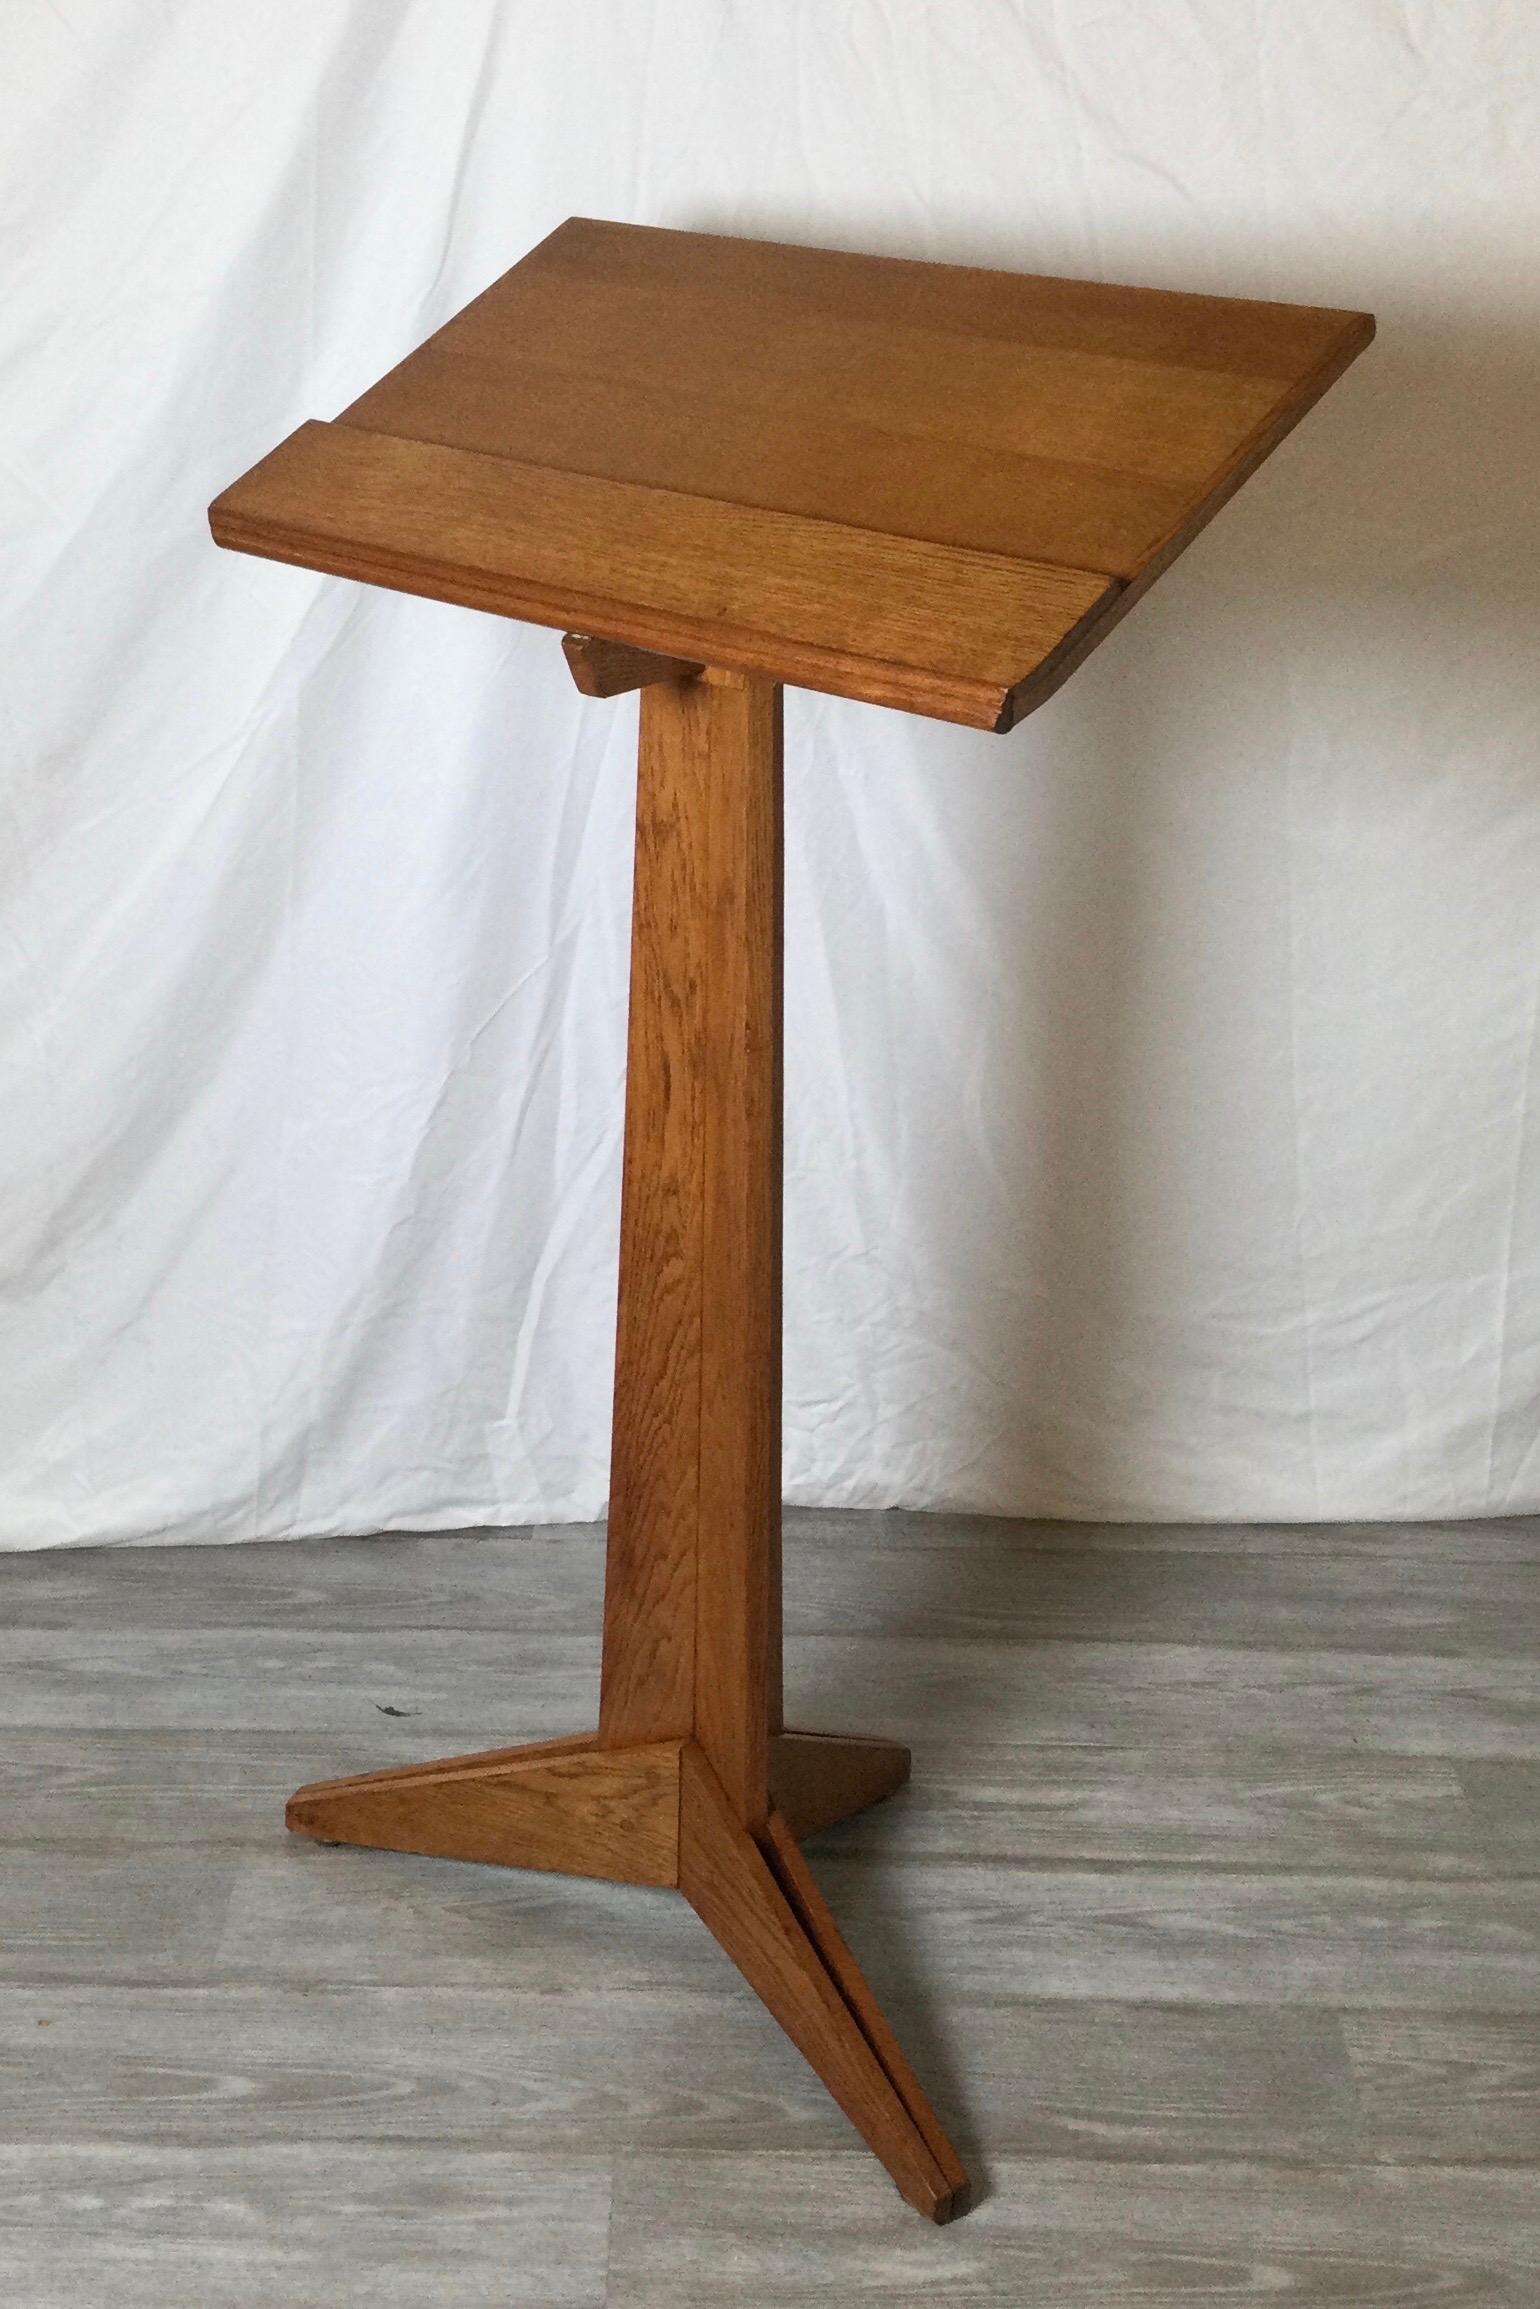 Tall solid oak standing lectern or wood podium. Handsome in. a geometric Frank Lloyd wright style. Finely hand crafted using wood dowel construction. Measures: 25